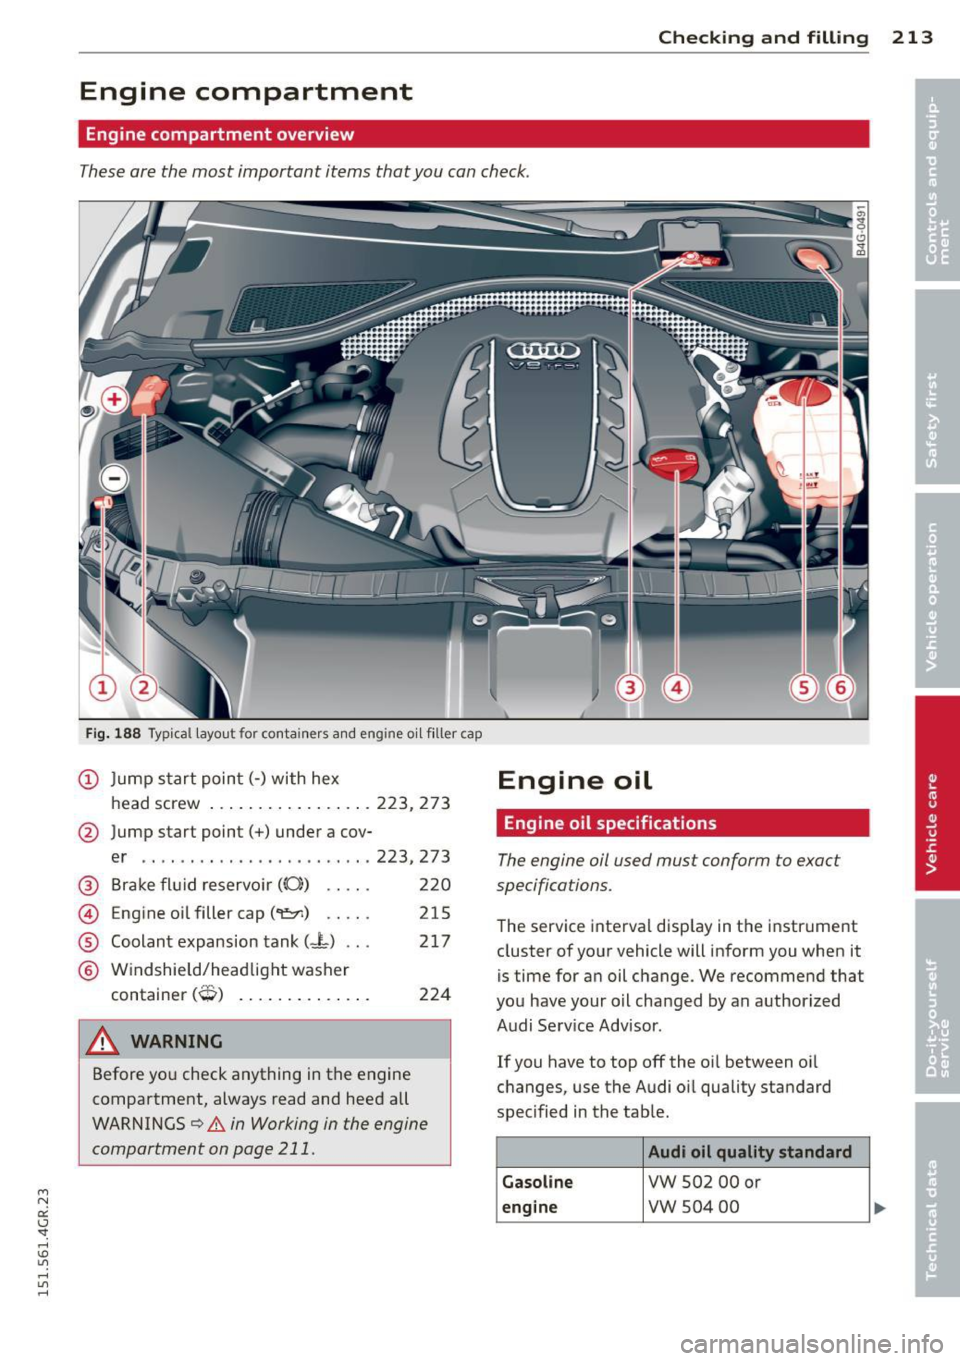 AUDI RS7 SPORTBACK 2015  Owners Manual " N 
a:: I.J "". rl I.O 
" rl 
" rl 
Checking  and  filling  213 
Engine  compartment 
Engine  compartment  overview 
These are the  most  important  items  that you  can check. 
Fig.  1 88 Typical